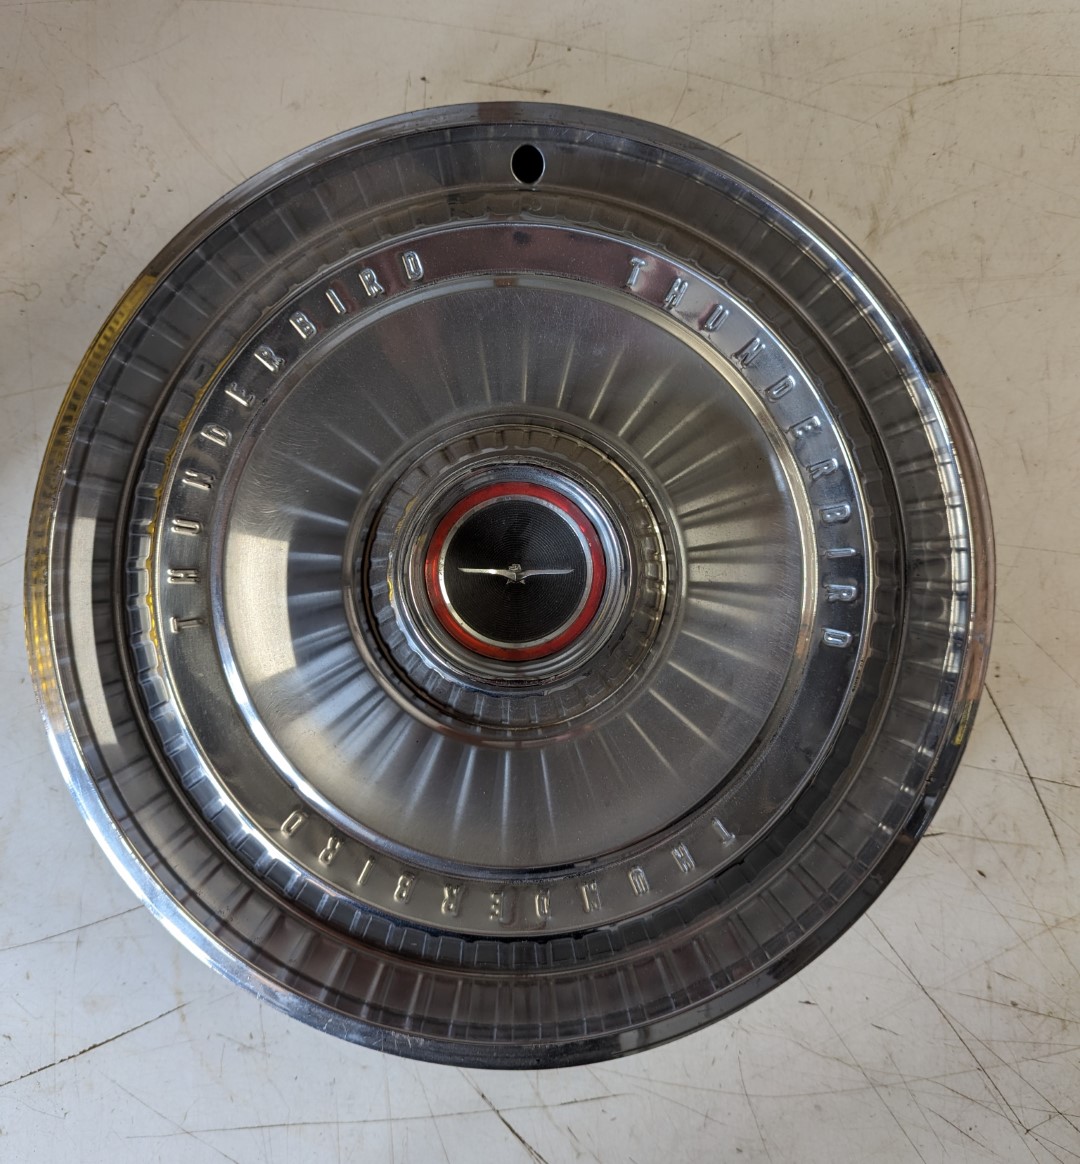 1966 Ford thunderbird hubcaps 15 inch